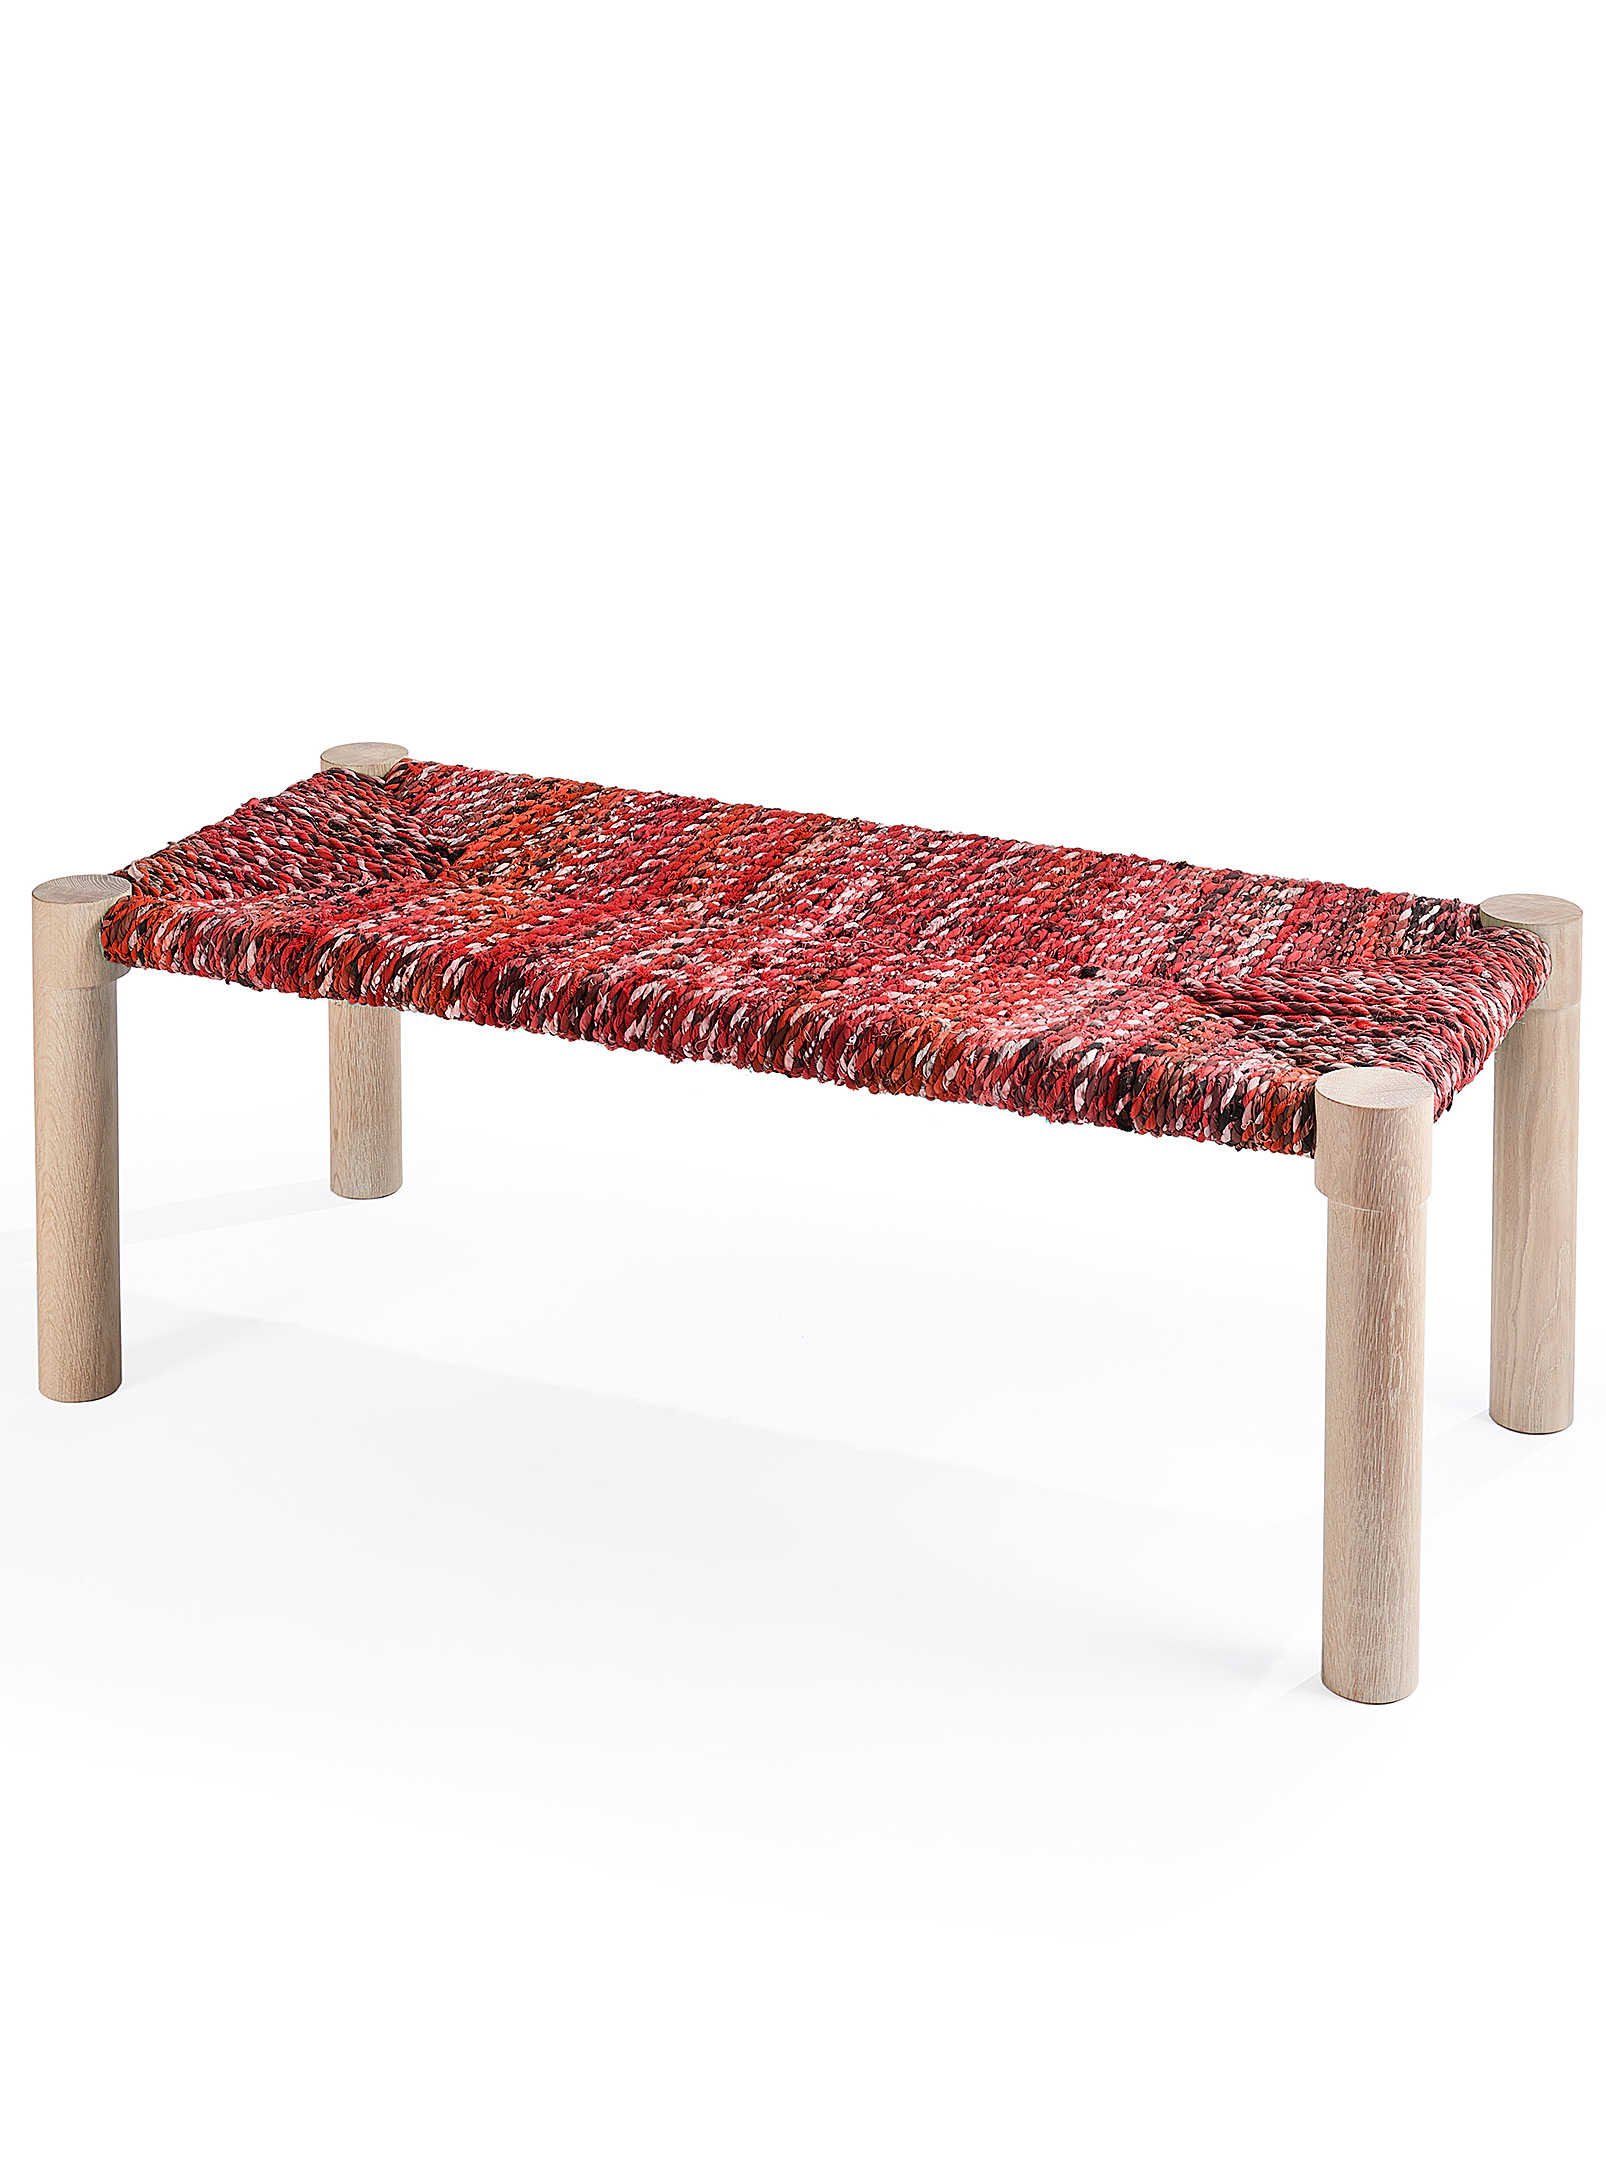 Coolican & Company Calla Bench In Red